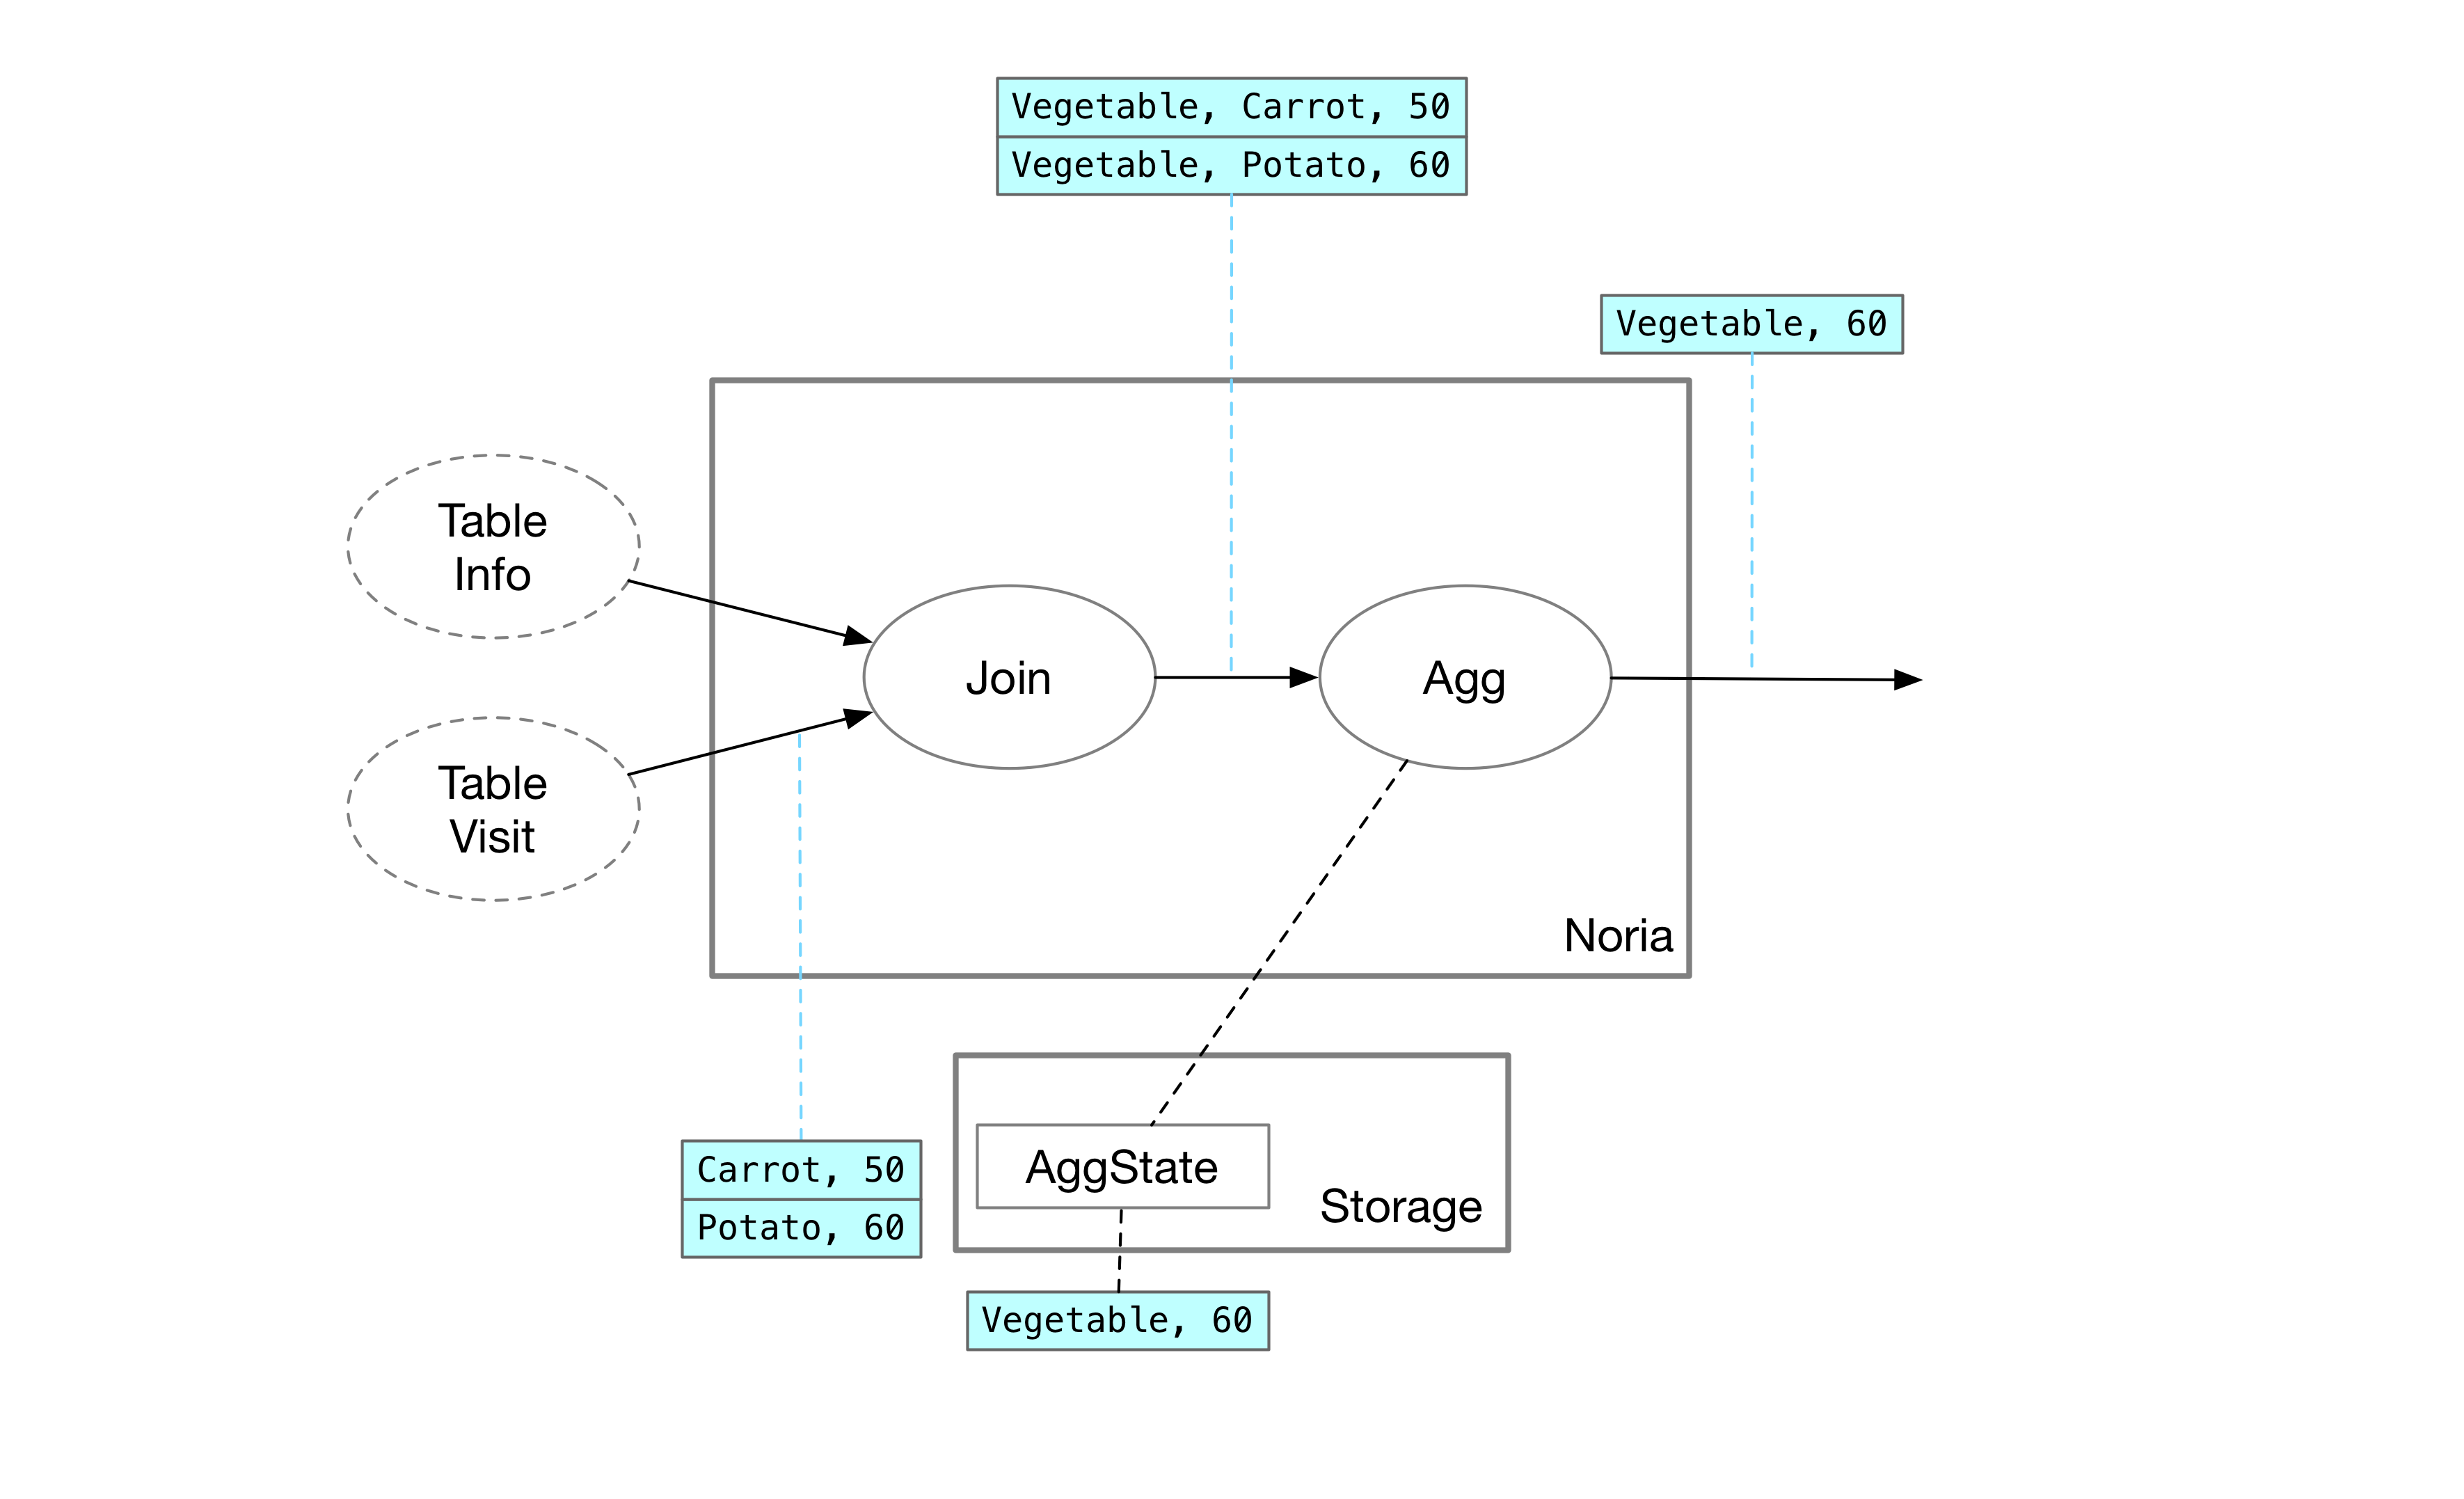 aggregation implementation of Noria